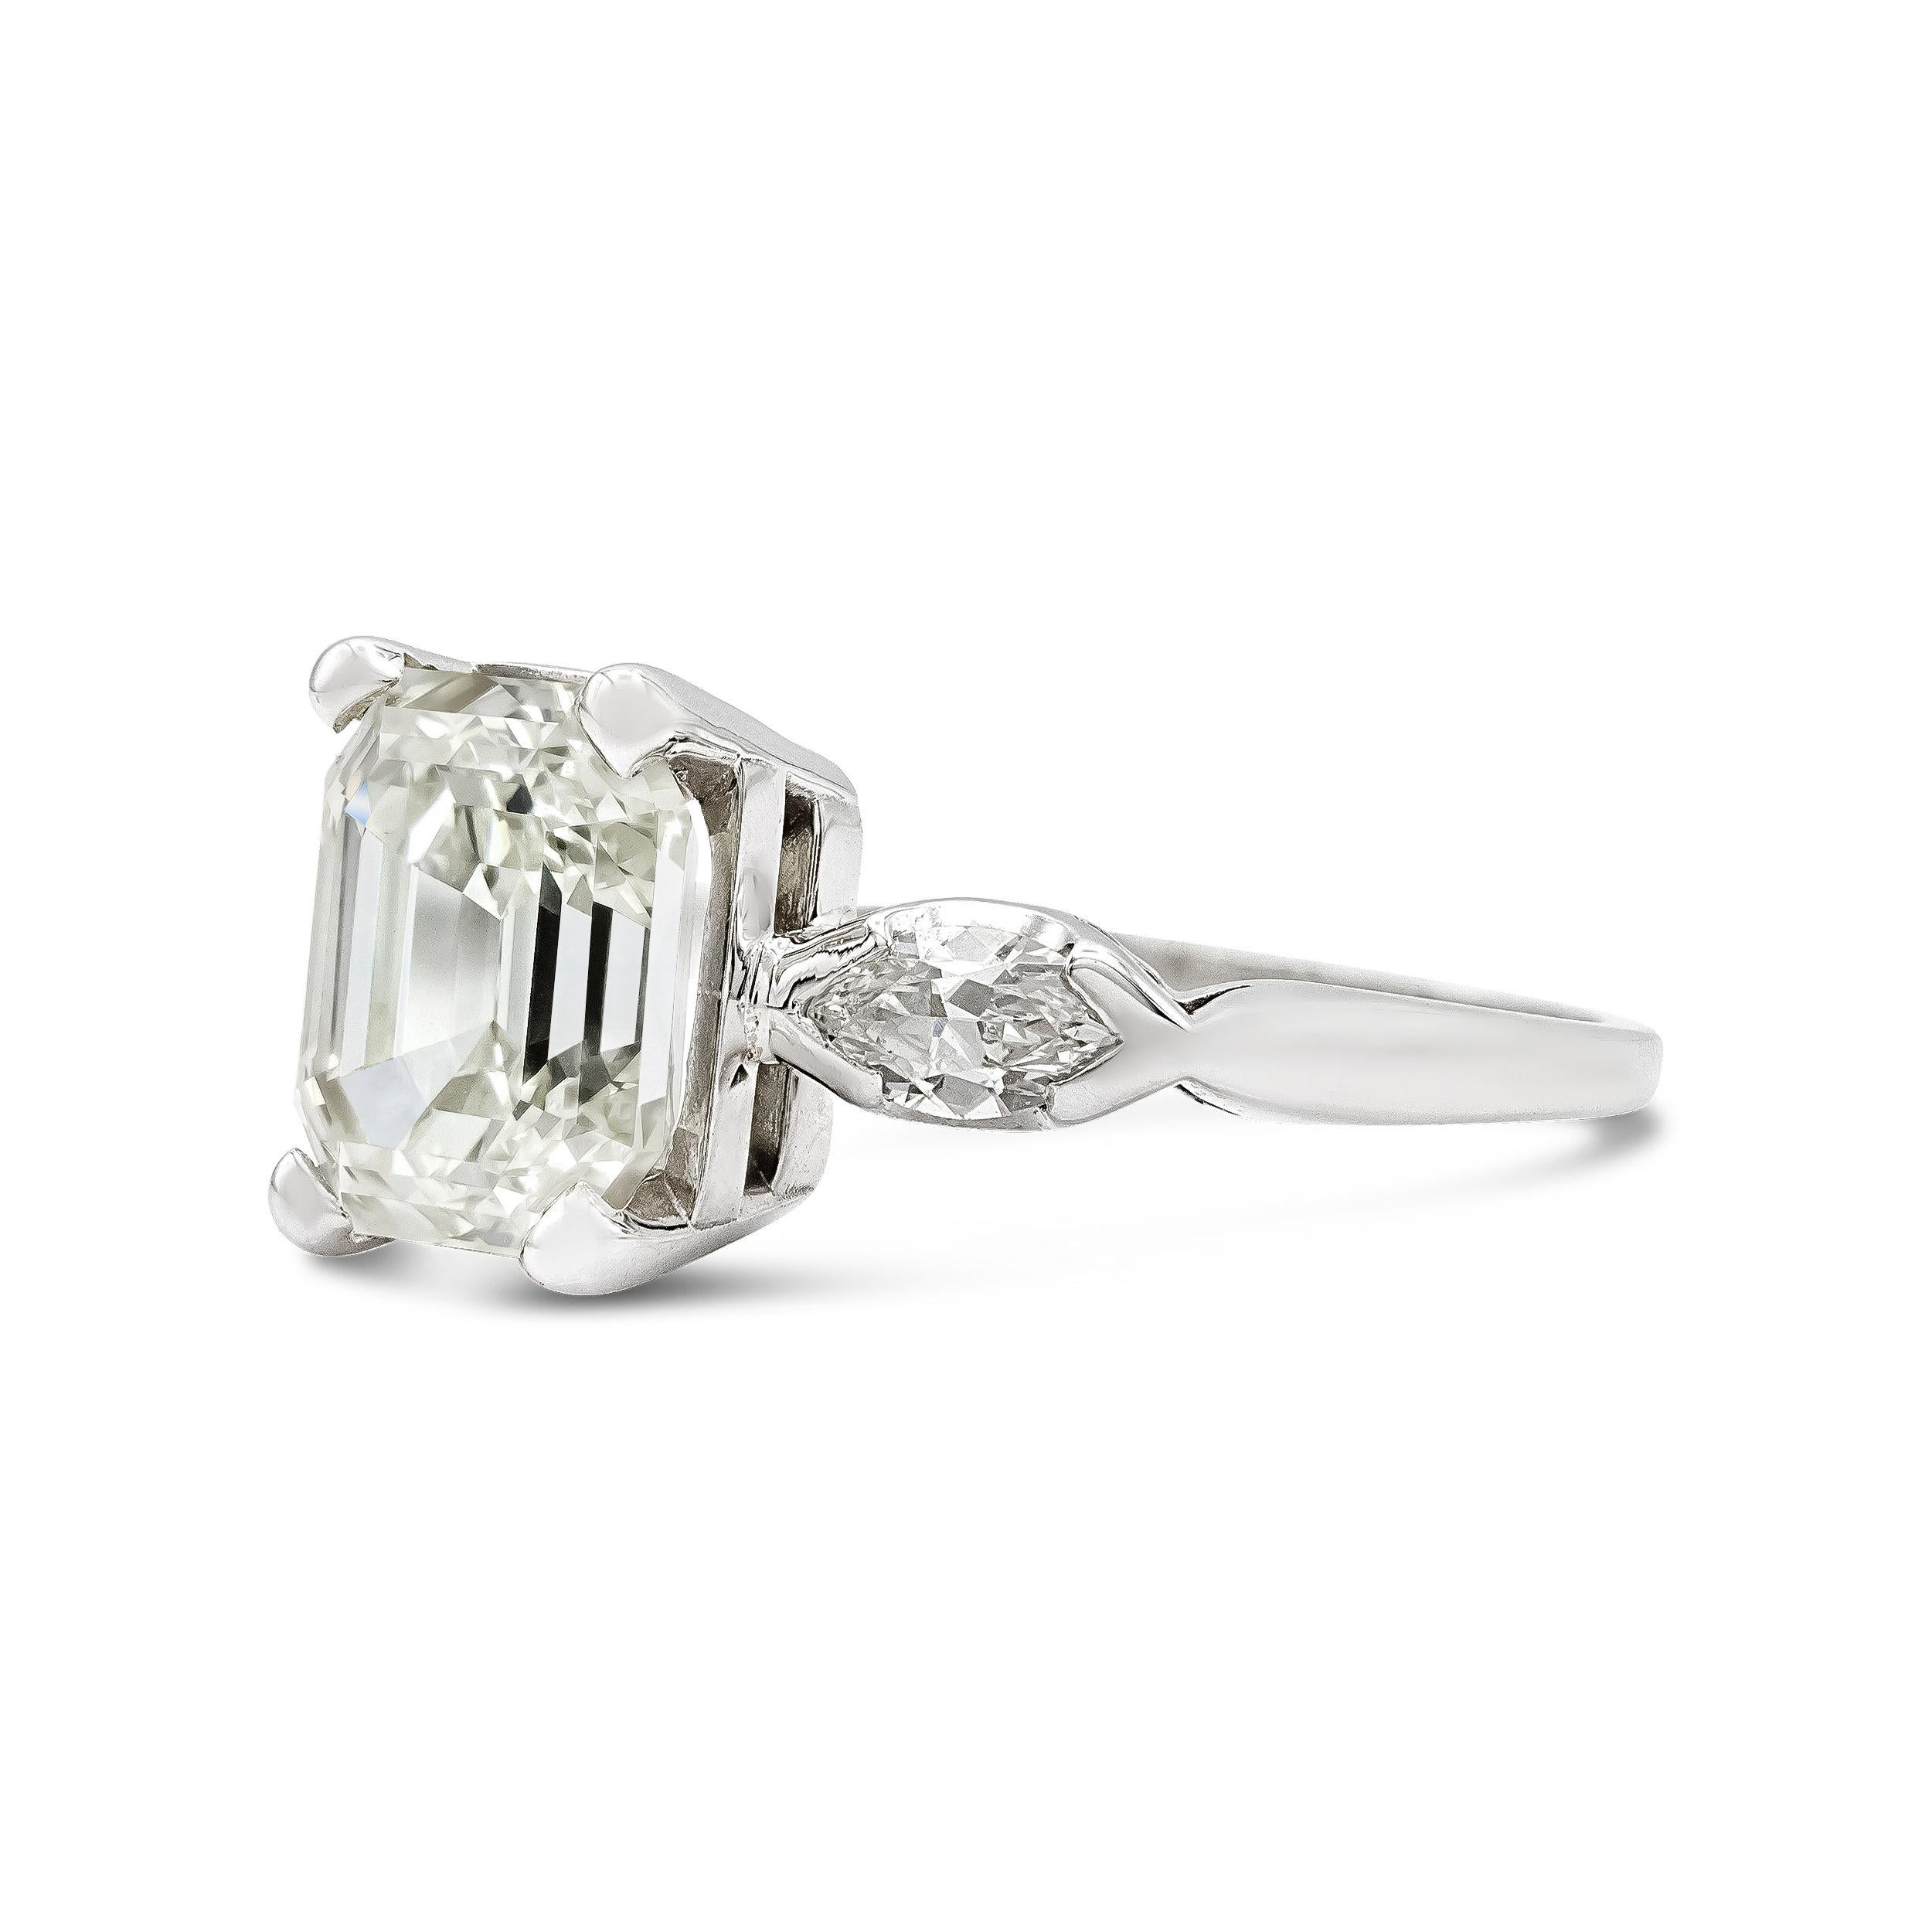 This quintessential Deco engagement ring is a true cut above. At her center is a nearly flawless 2.75 ct. cut-cornered emerald cut diamond with a small table, and well-suited proportions. It's superior cut is brilliantly illuminated by distinctive